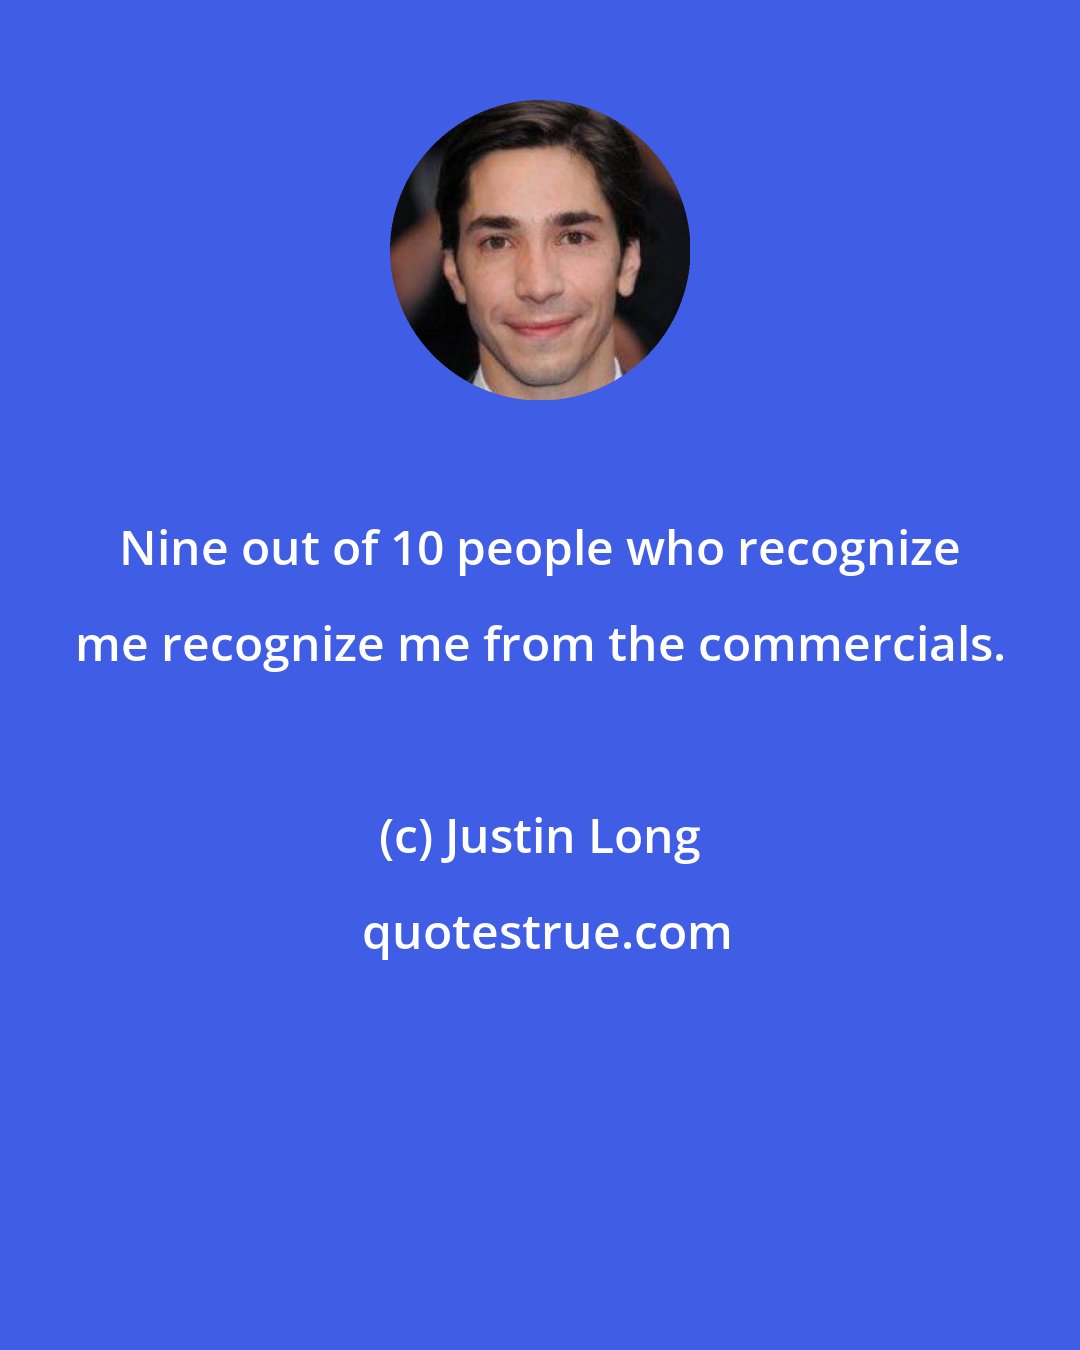 Justin Long: Nine out of 10 people who recognize me recognize me from the commercials.